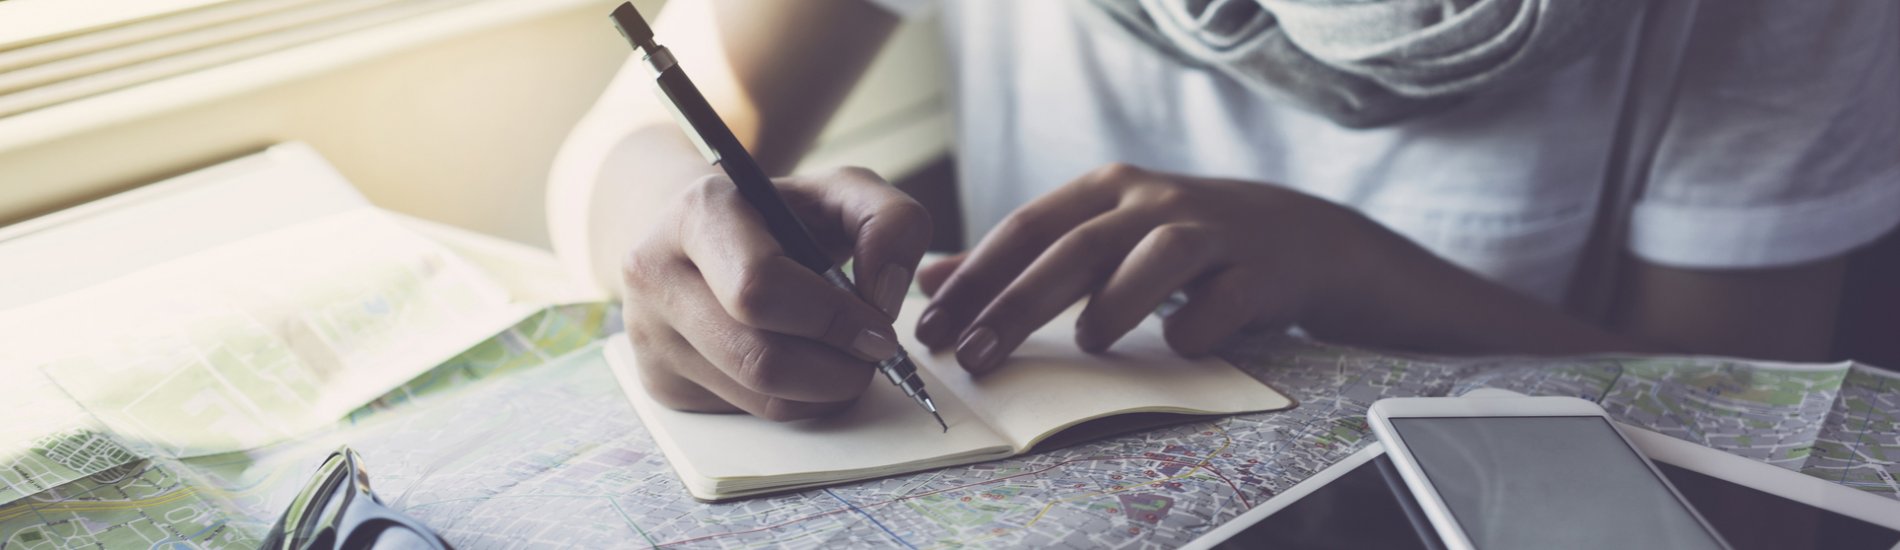 Young woman on a train taking notes over an open map